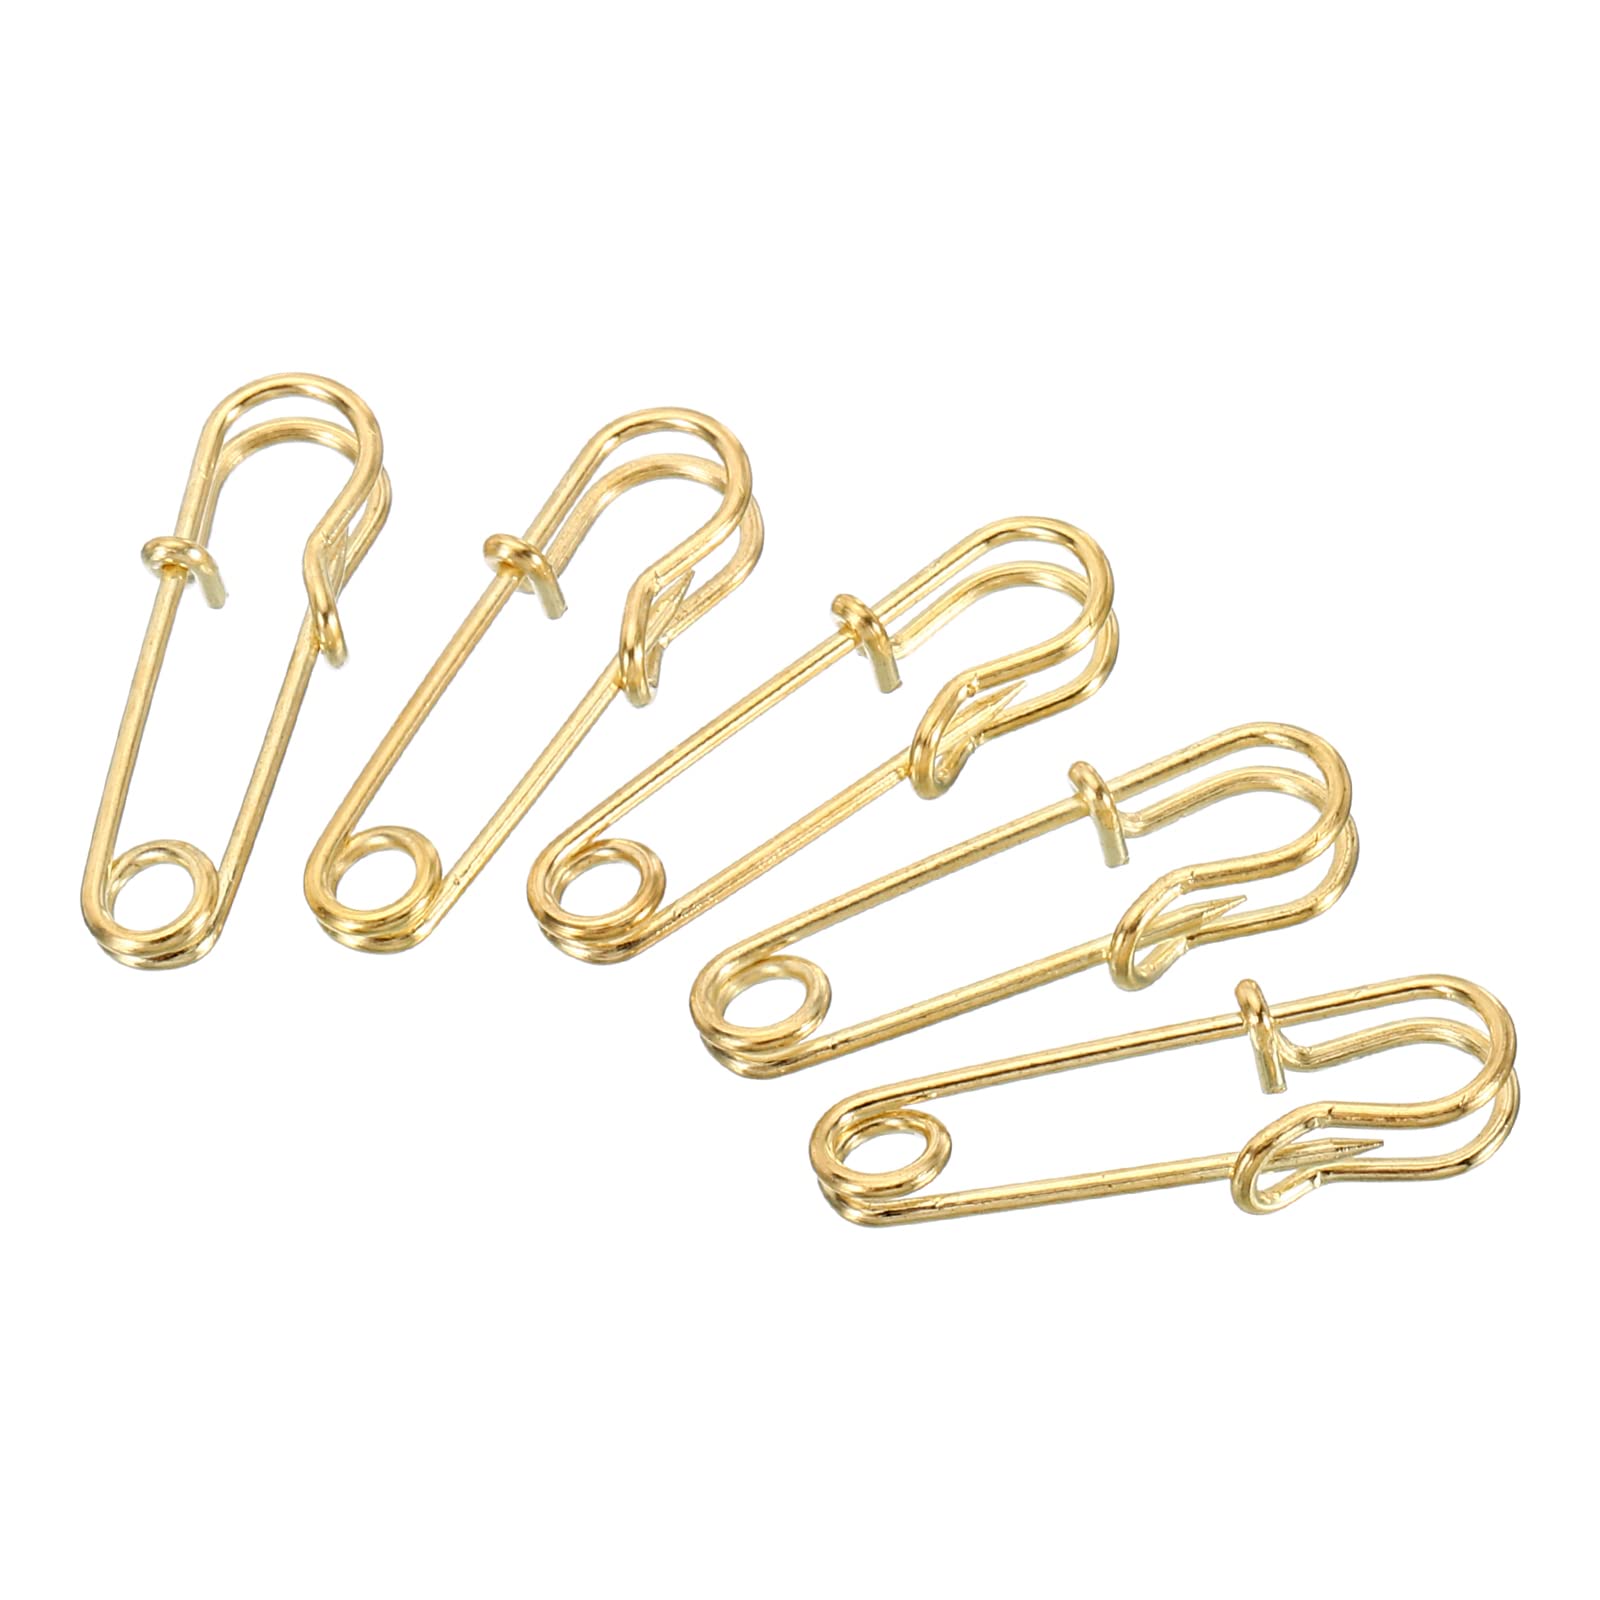 24pcs Small Safety Pins Rose Gold 20mm Metal Safety Pins Sewing